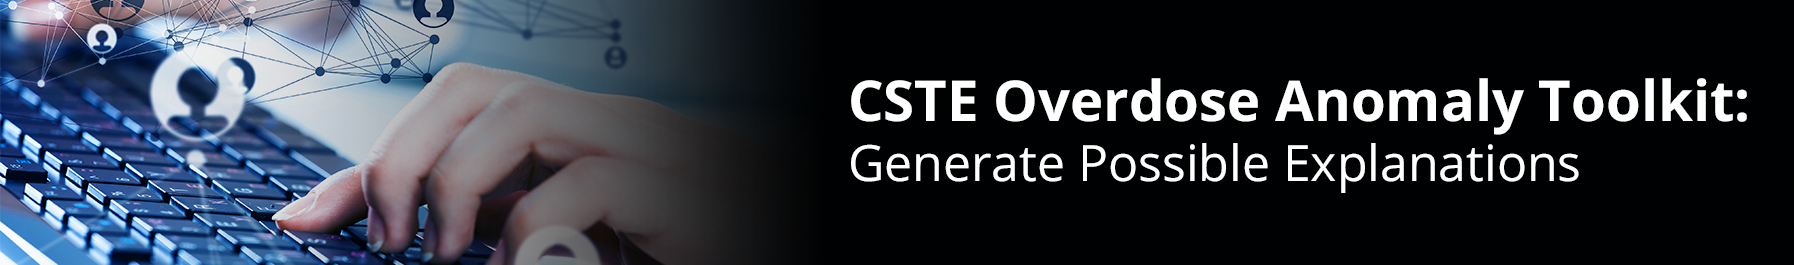 CSTE Overdose Anomaly Toolkit: Generate Possible Explanations